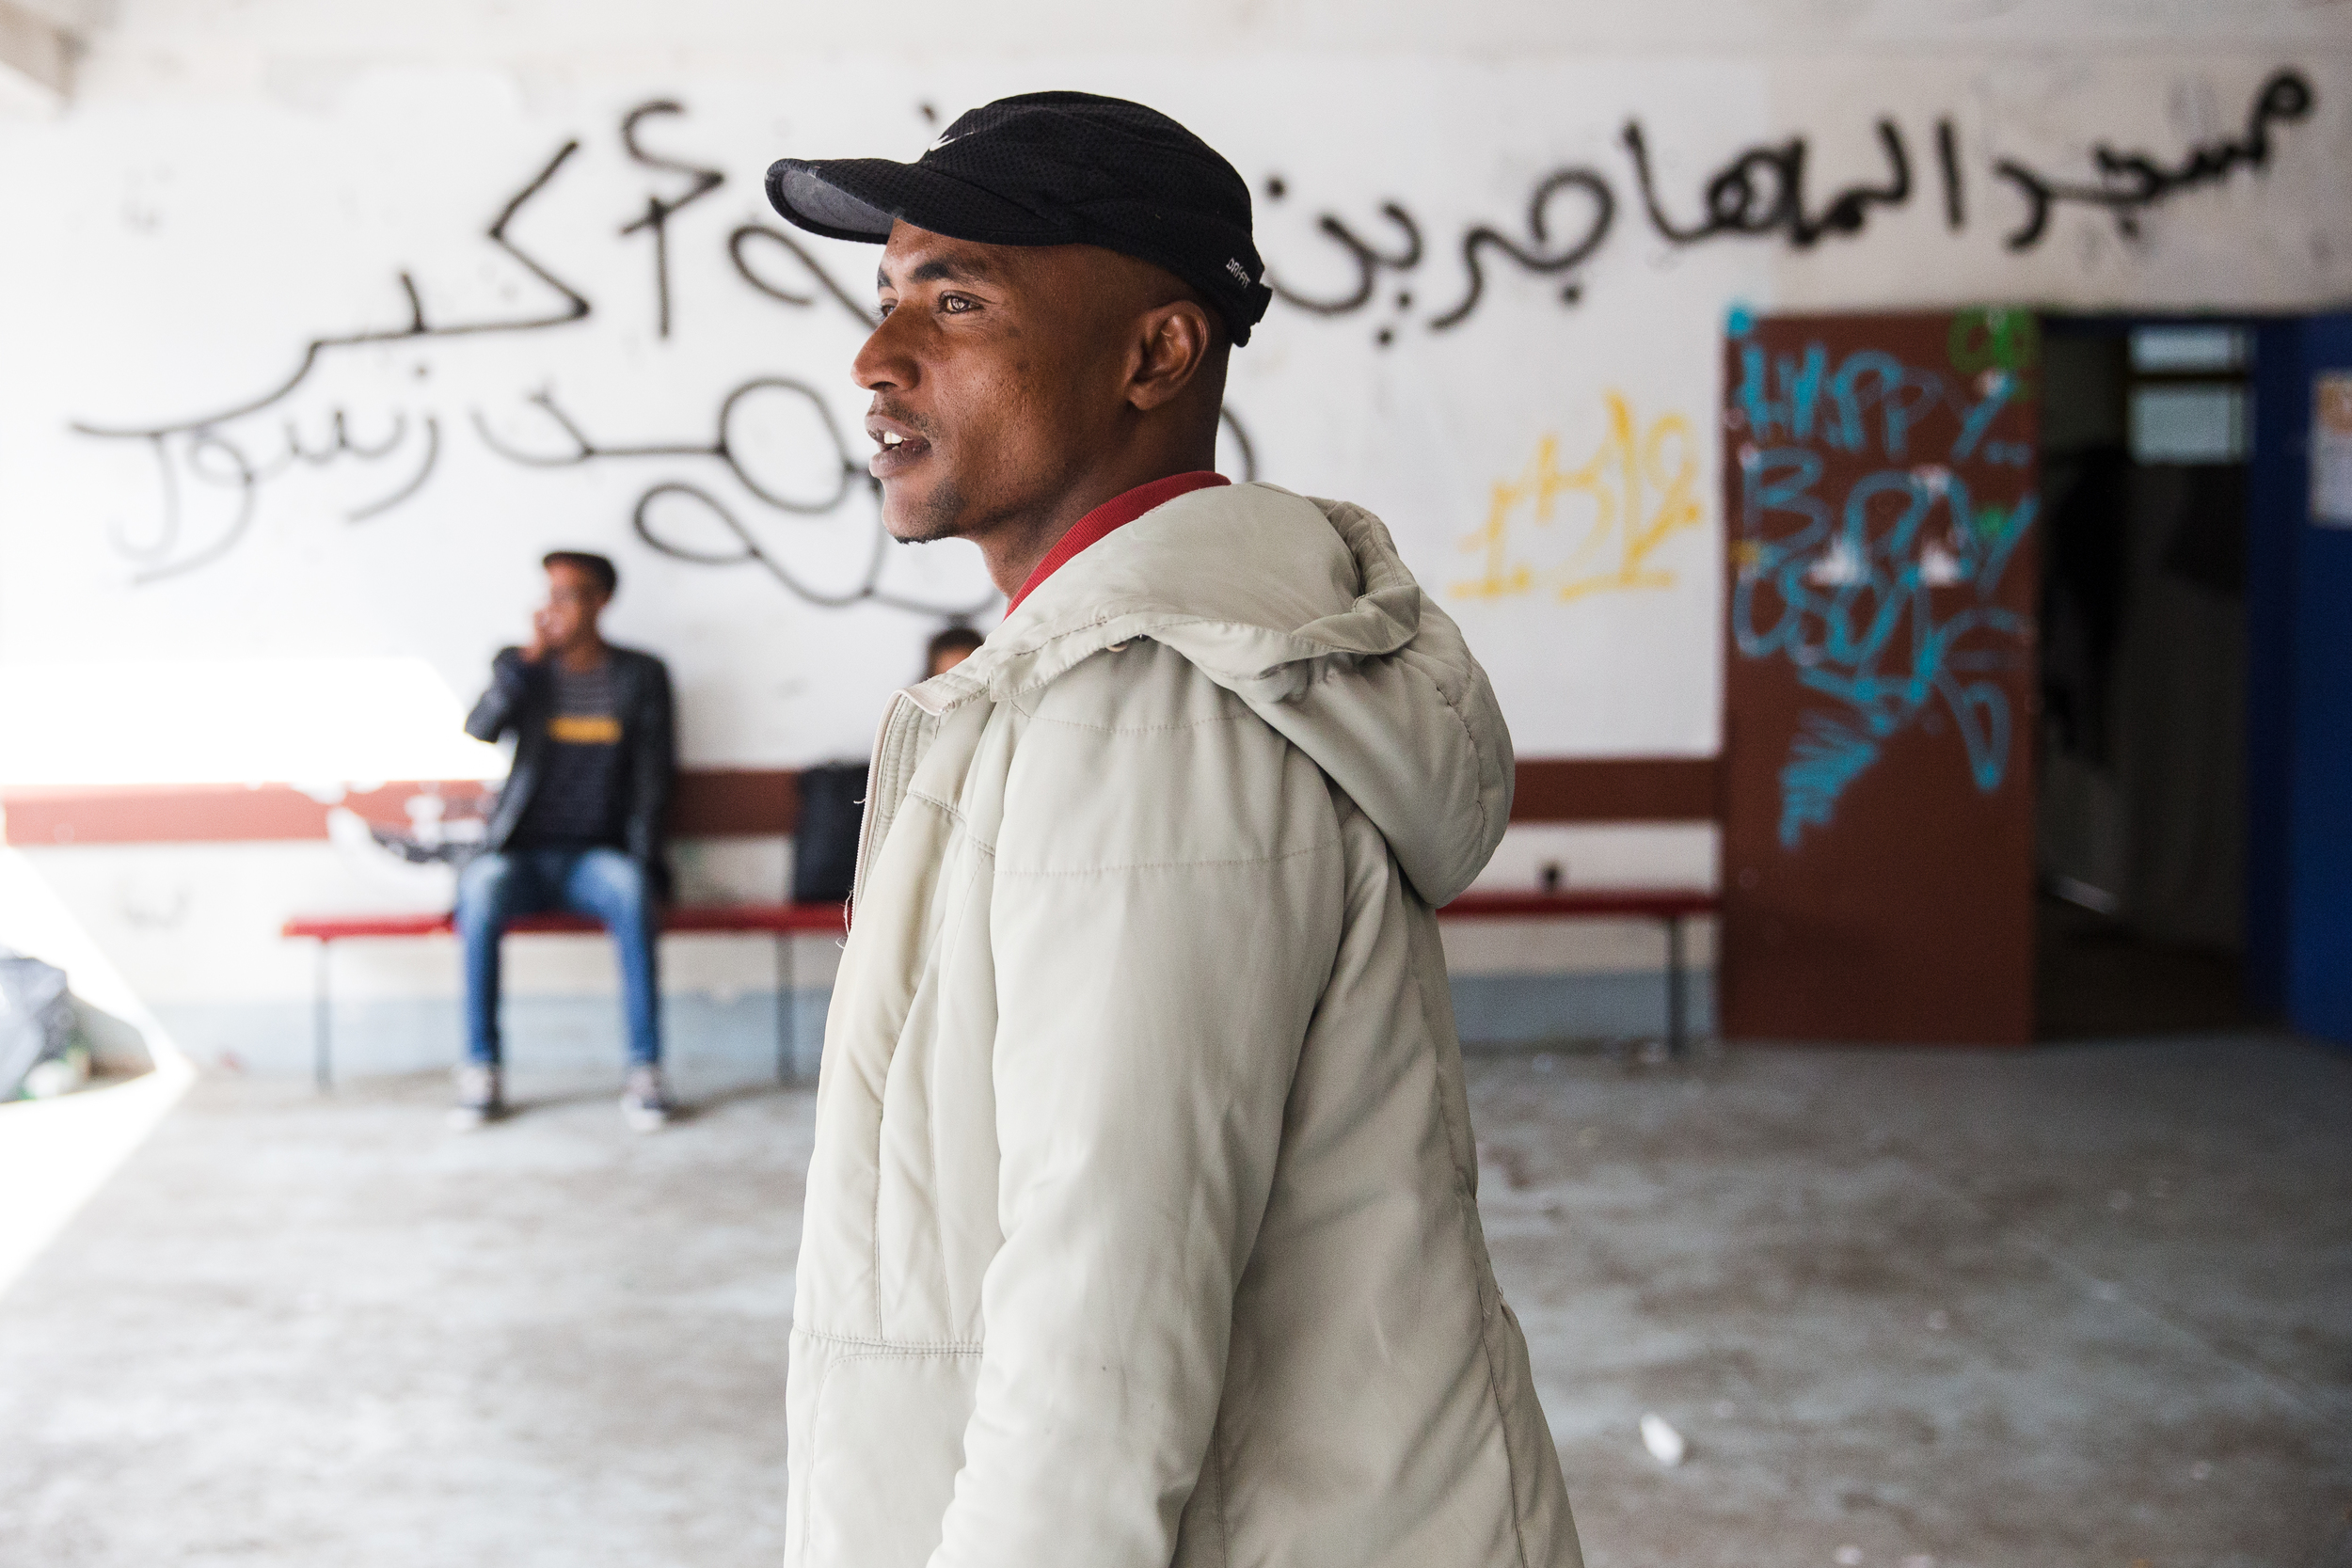   Mossab, 23, is from Post Sudan, where he worked as a housepainter. He paid a smuggler $1,000 to leave his country. After four months in the Libyan desert he caught a makeshift boat to Italy. Forty of his fellow passengers drowned.  